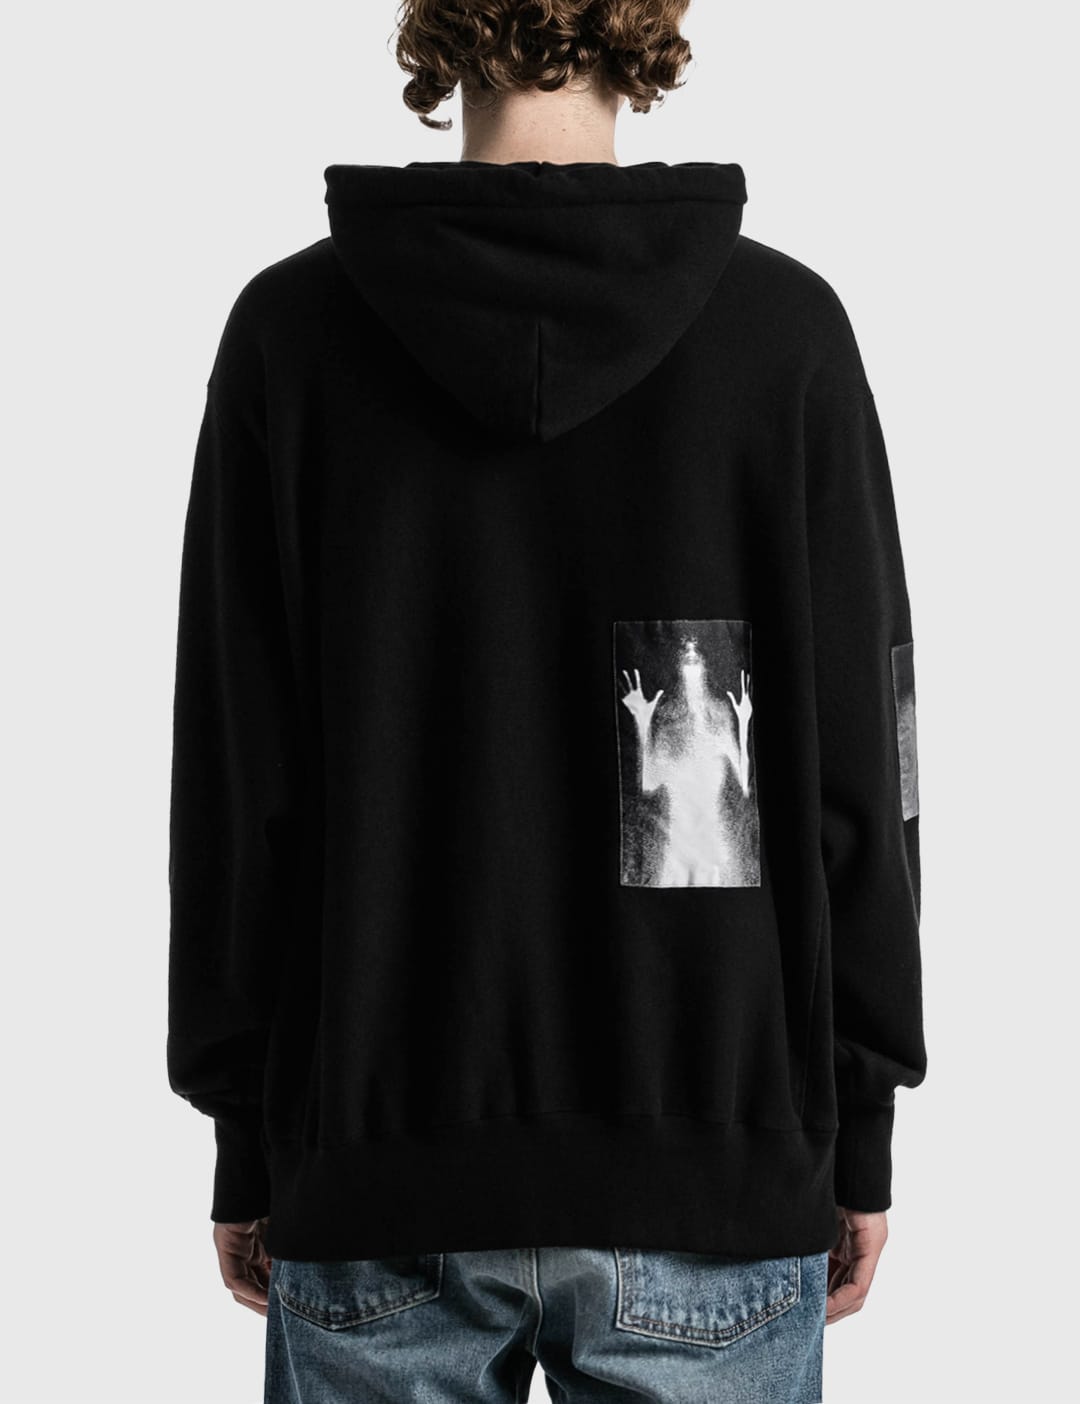 Undercover - Psycho House Graphic Hoodie | HBX - Globally Curated 